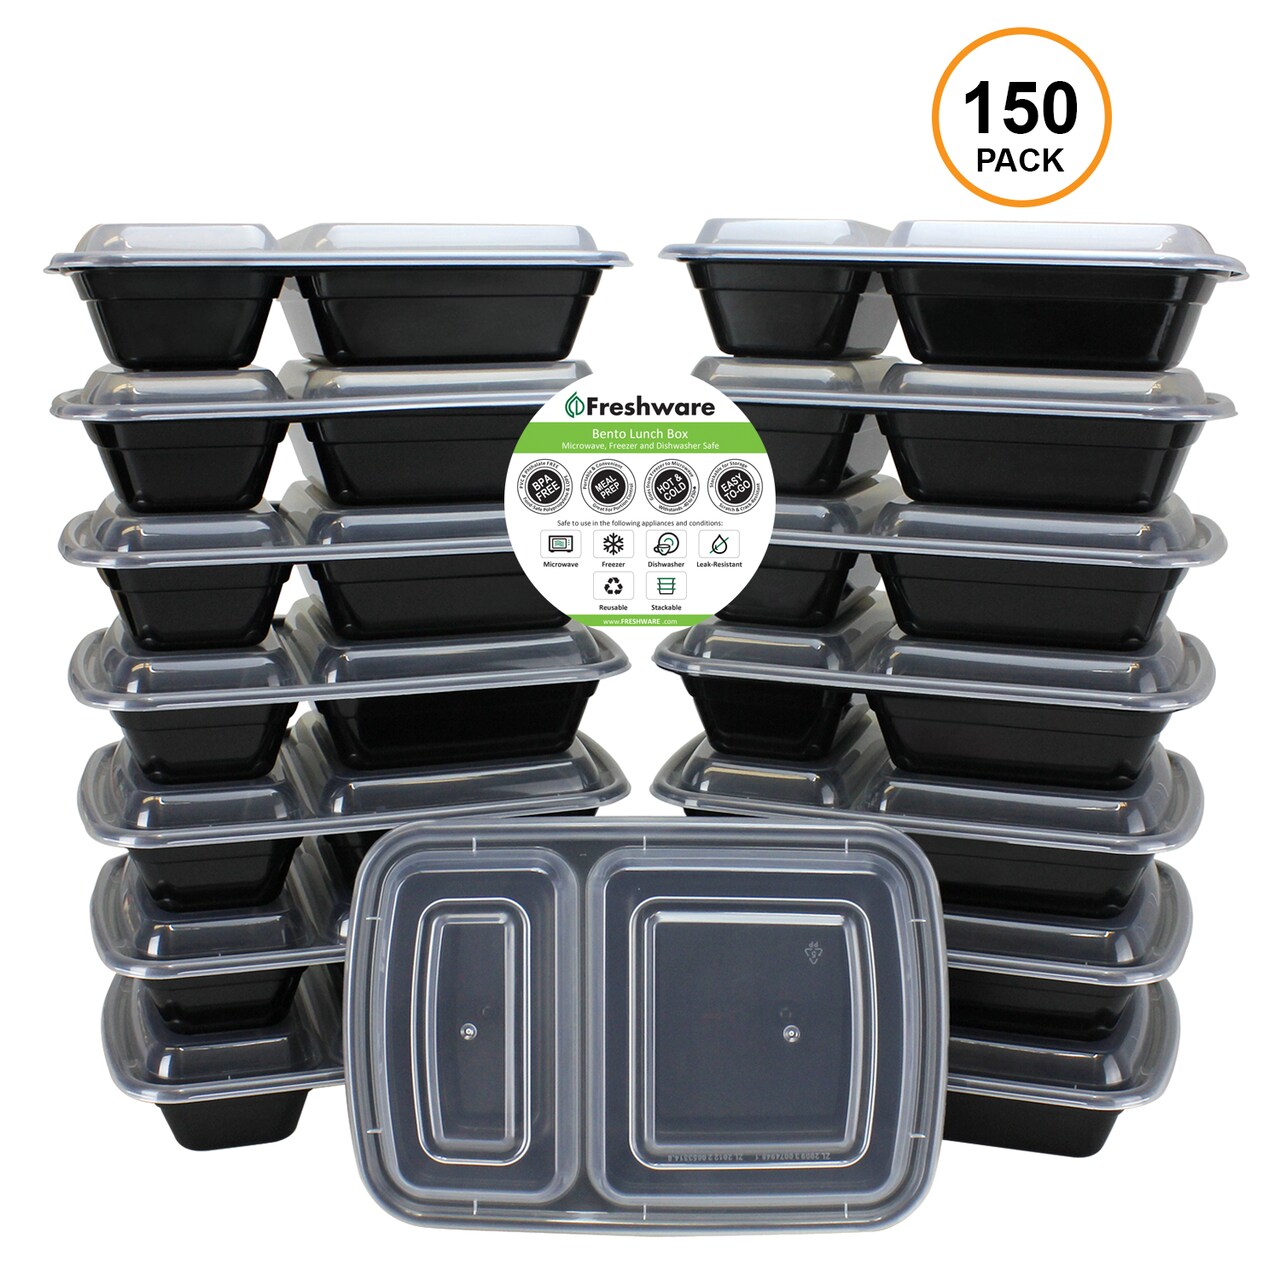 Freshware 150-Pack 2 Compartment Bento Lunch Boxes with Lids - Meal Prep, Portion  Control, 21 Day Fix & Food Storage